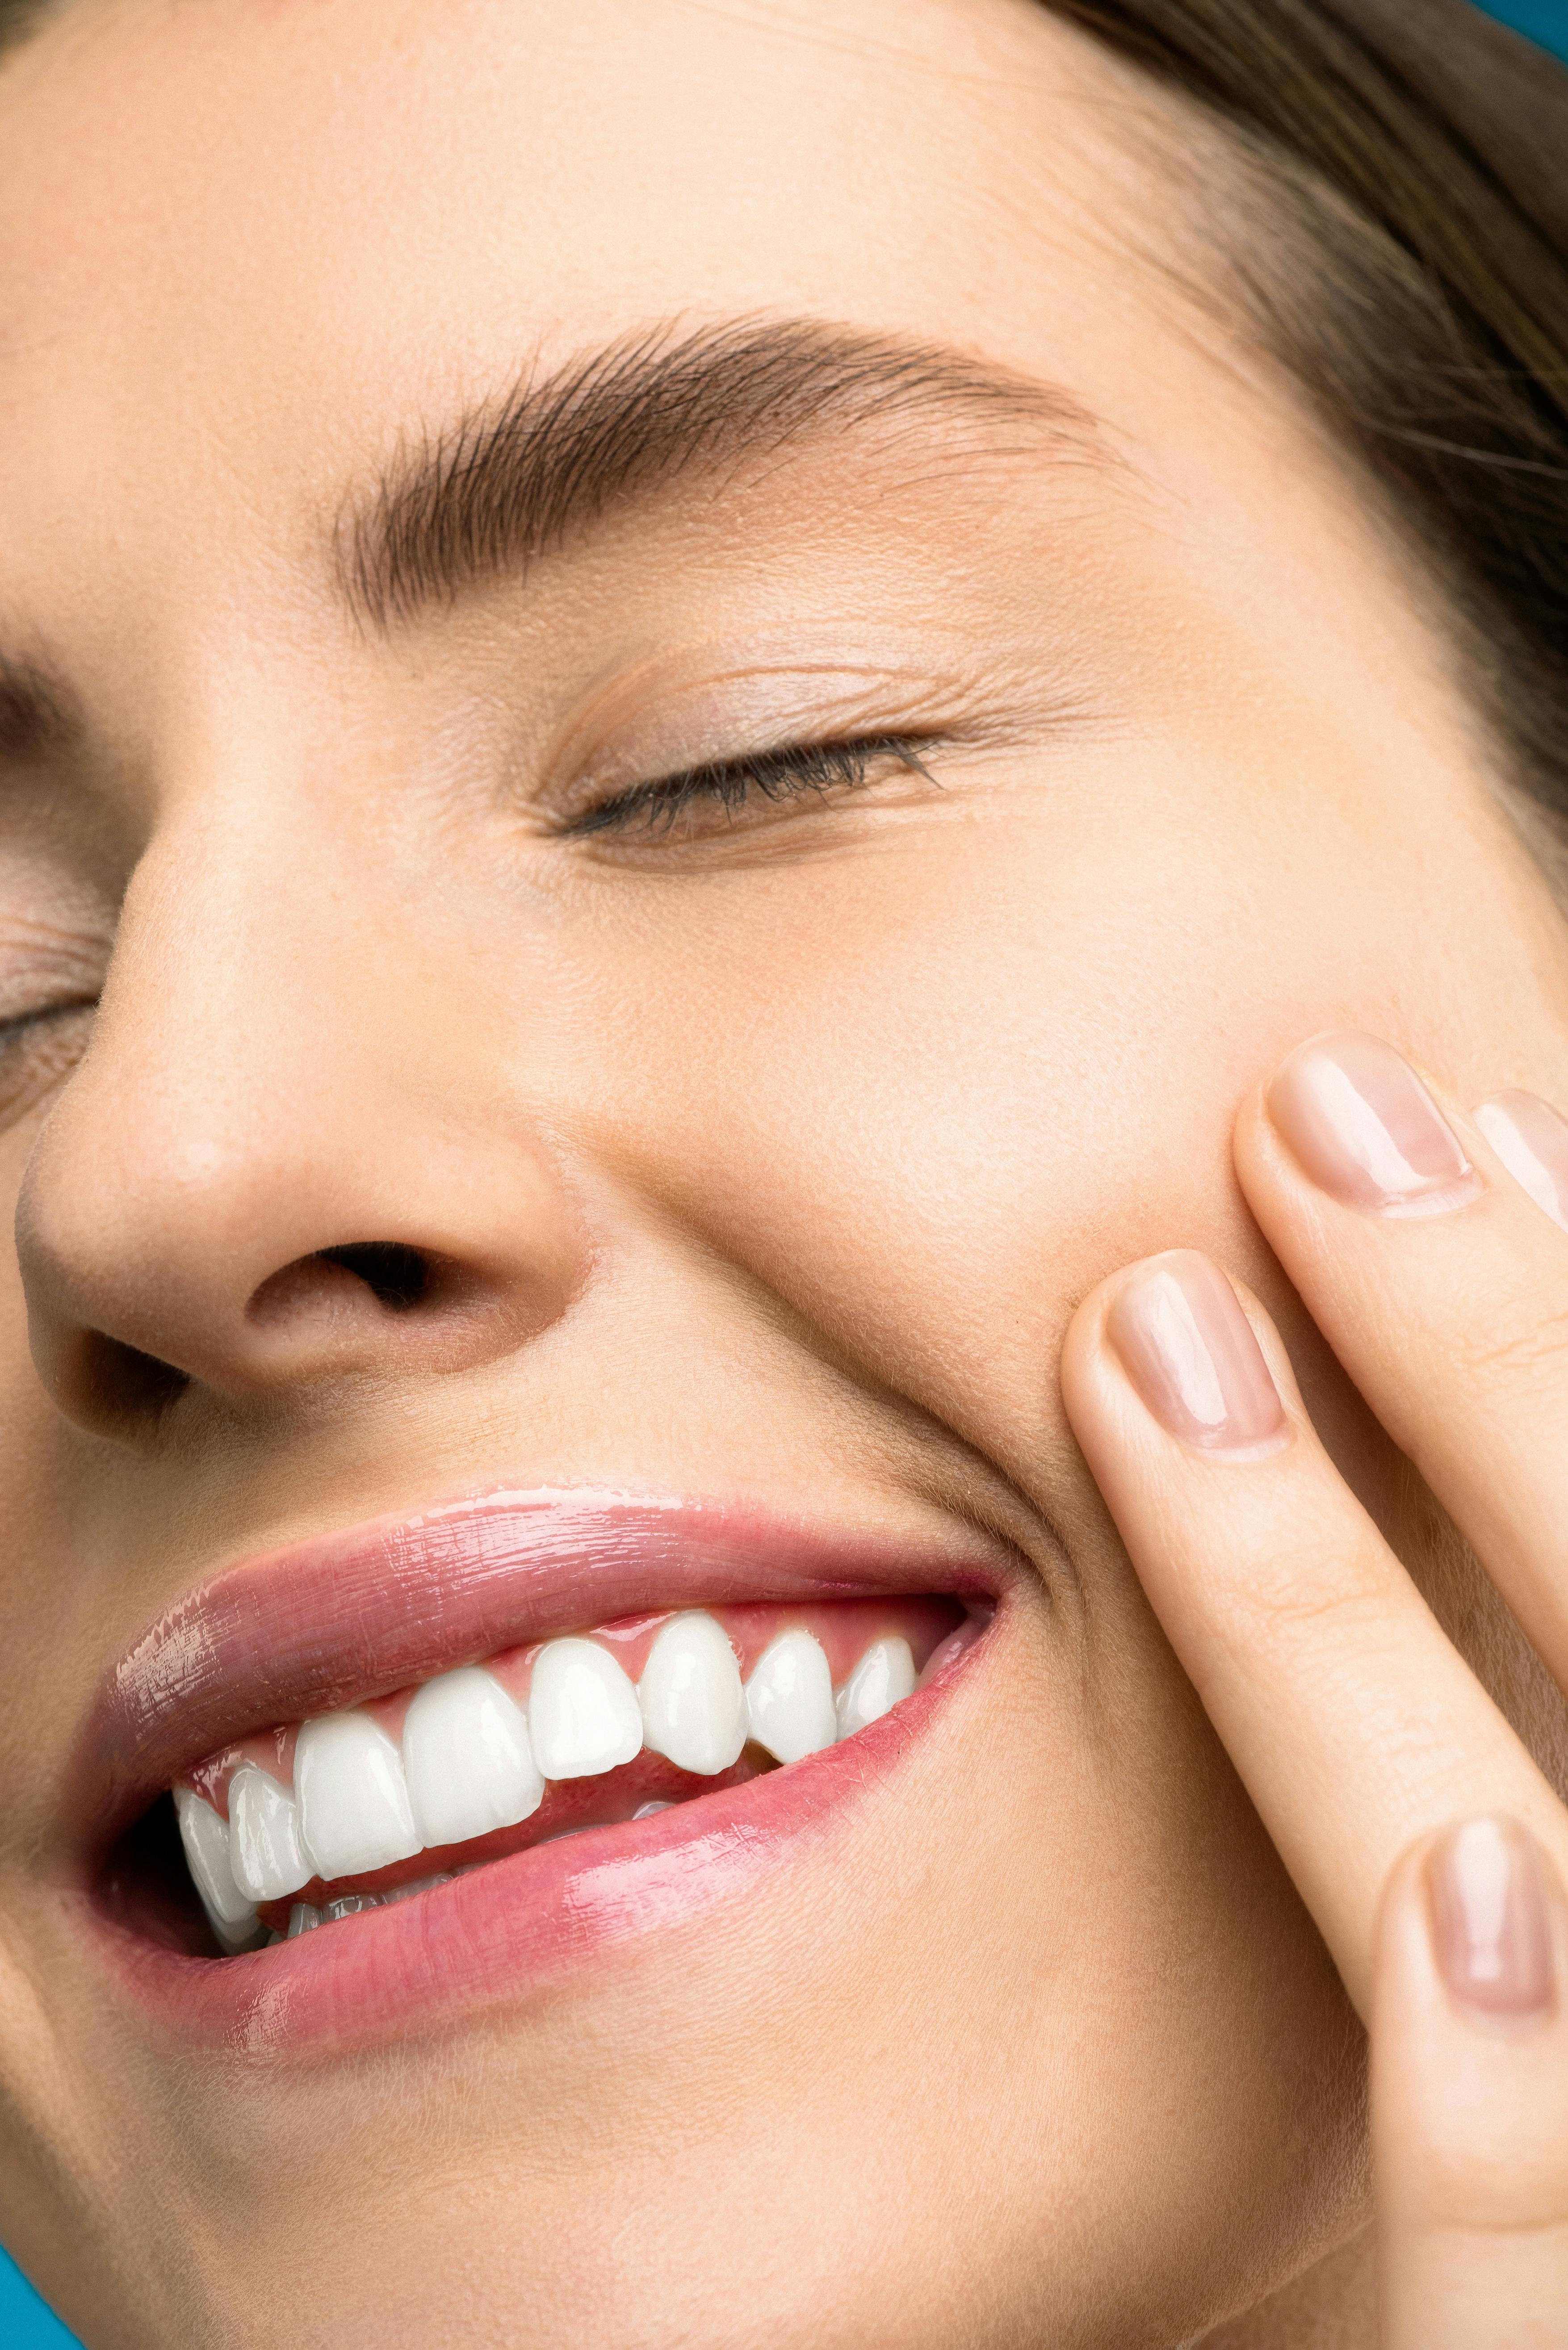 Affordable Veneers Abroad: Colombia and Other Budget-Friendly Options